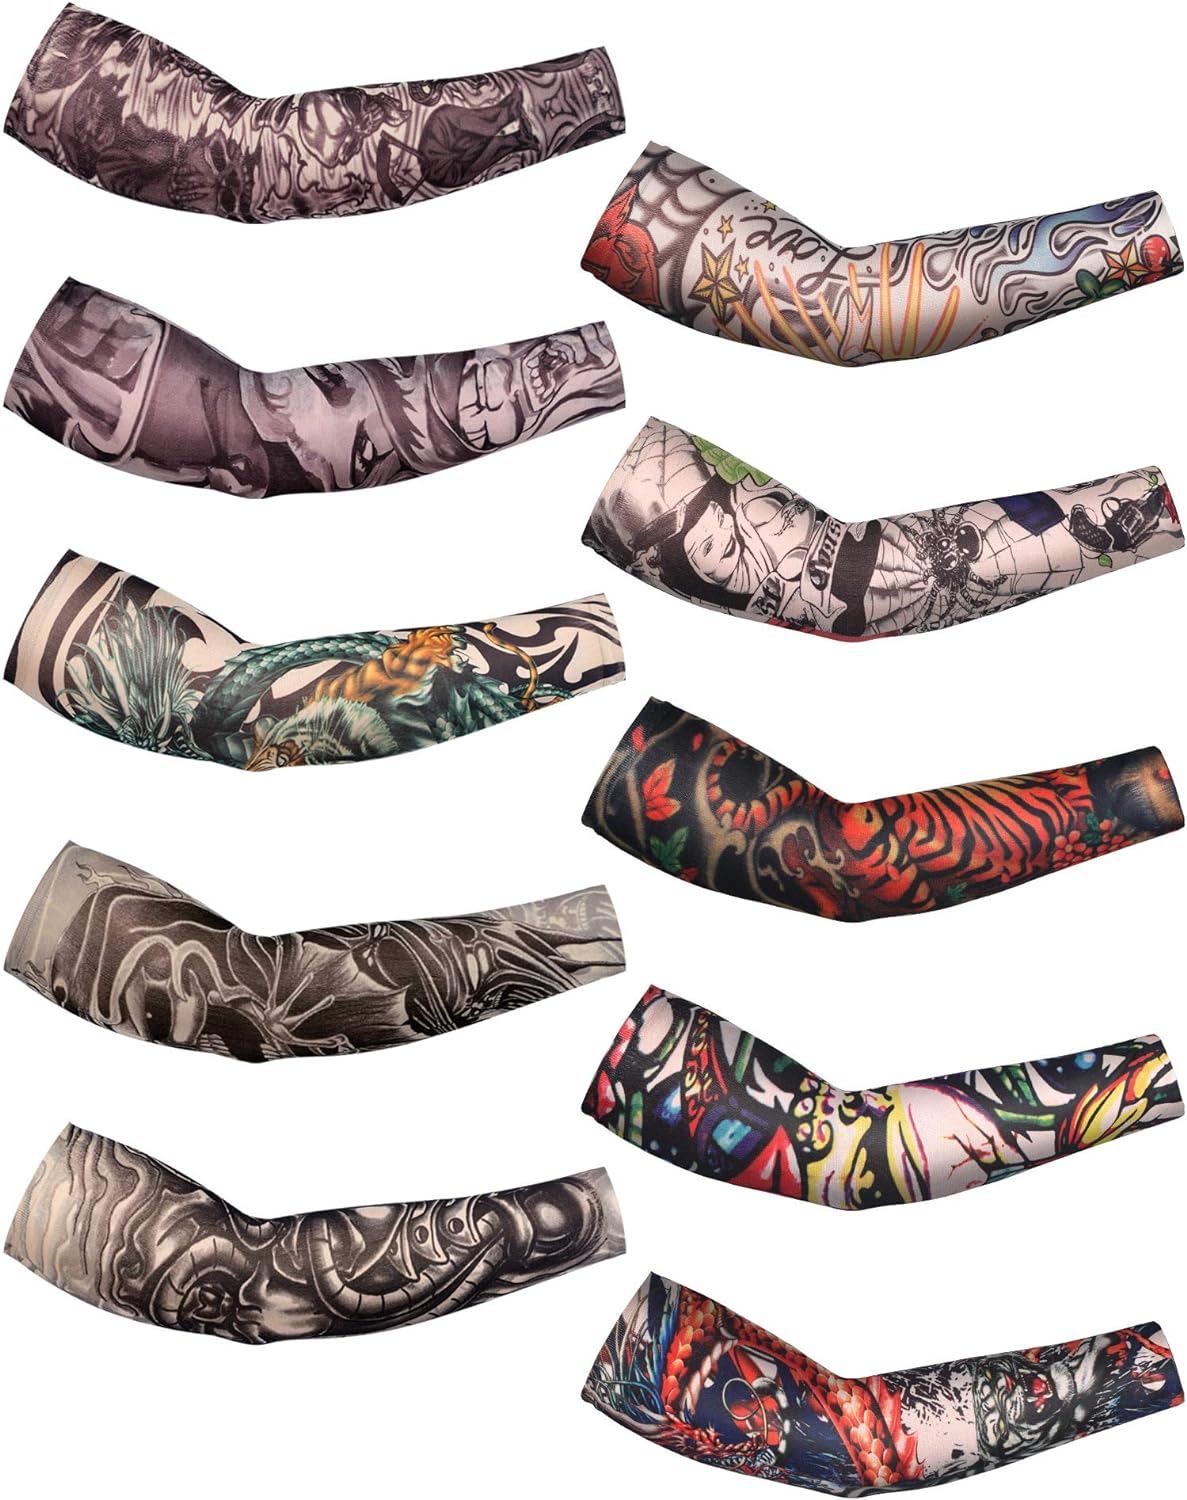 10 Pairs Men's Cooling Arm Sleeves Long Fingerless Arm Cover for Fishing Outdoor Hiking